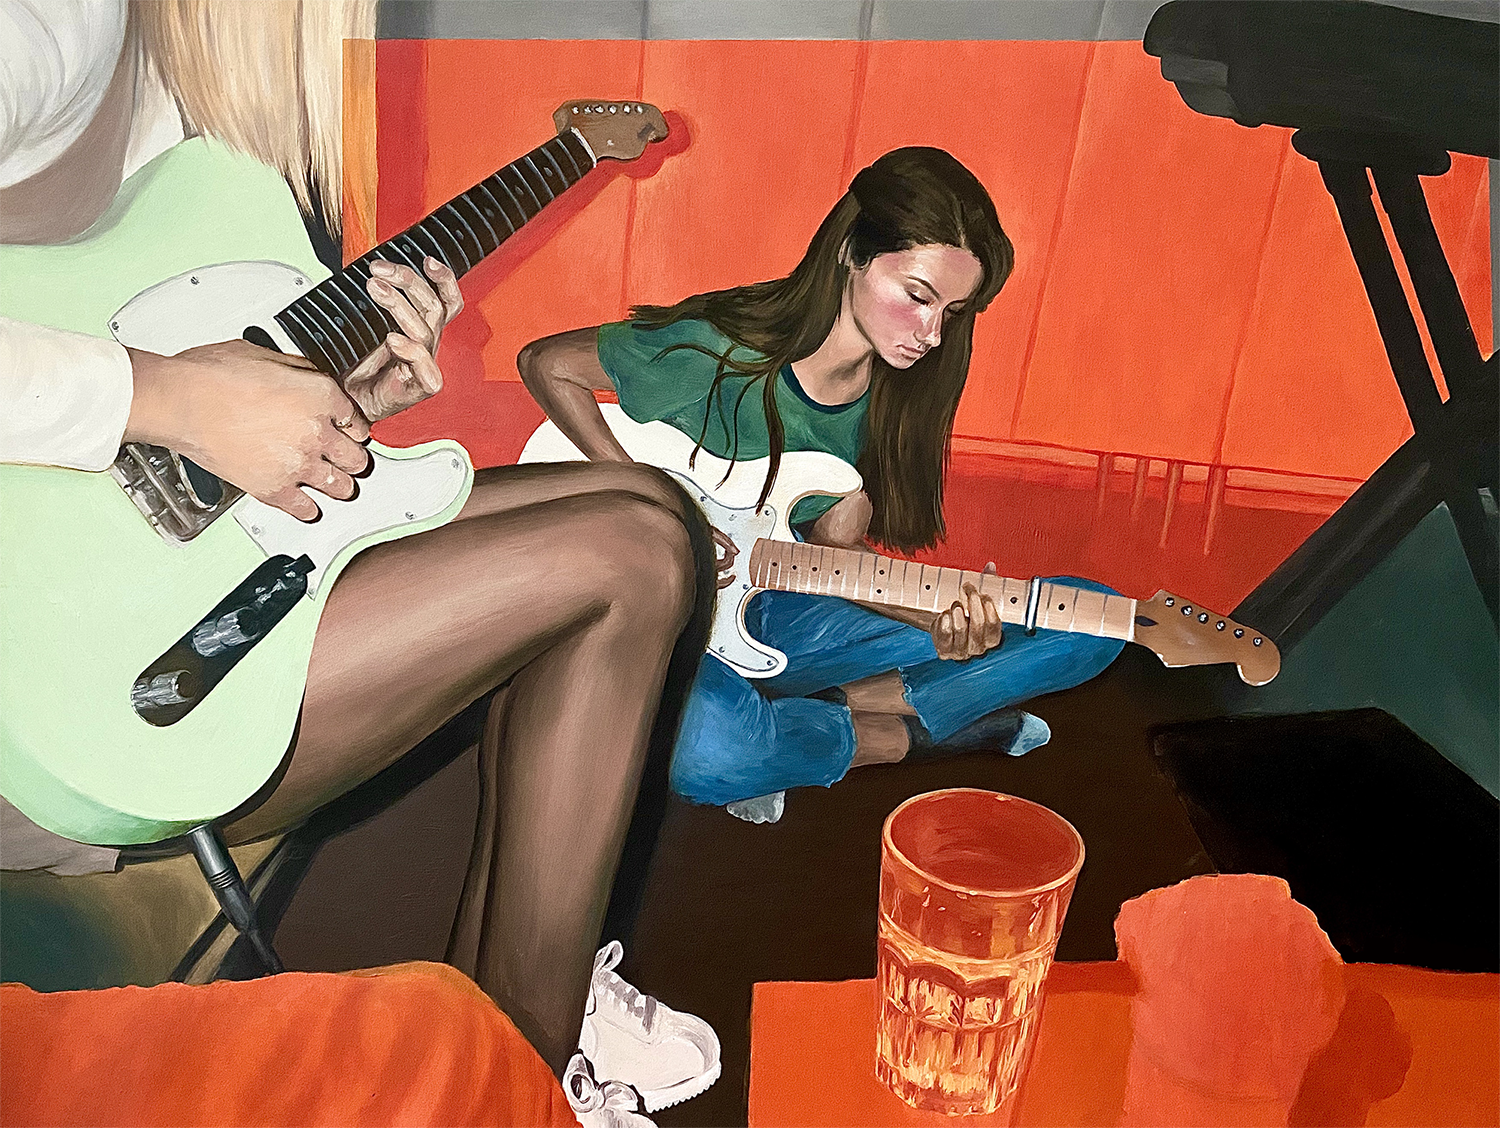 Illustration of two young women playing guitars while sitting.